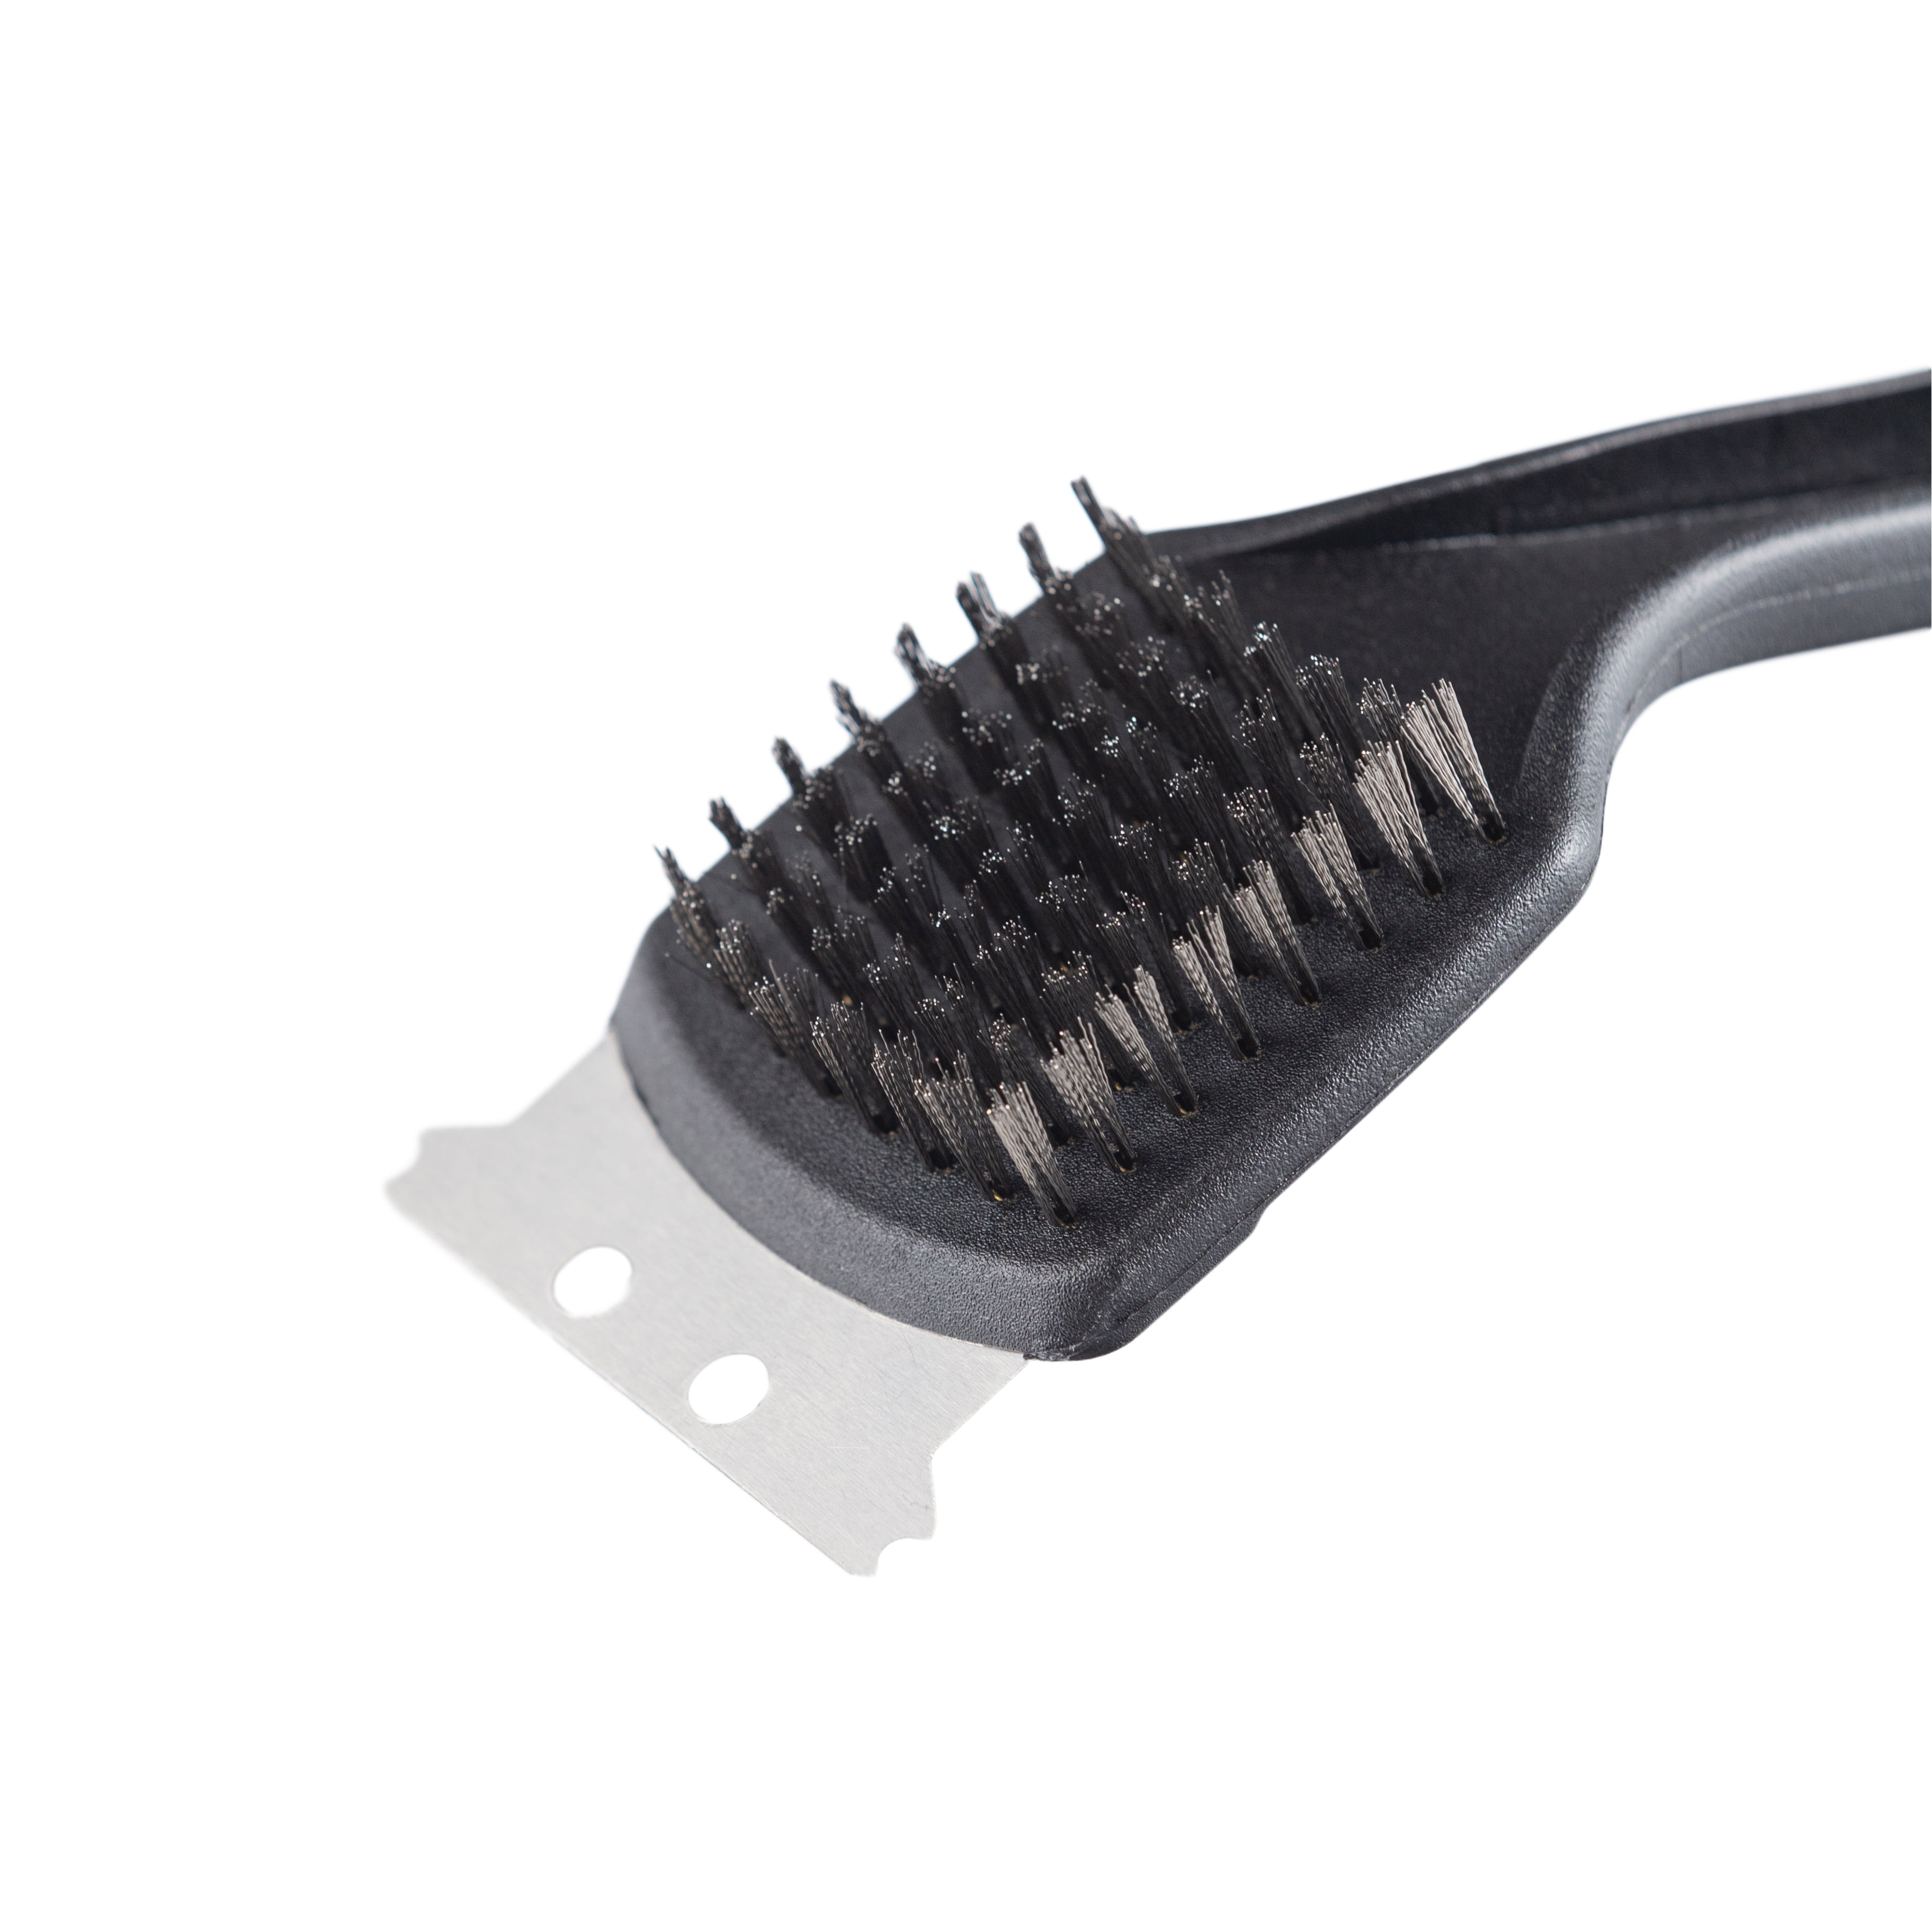 Expert Grill 16.5-inch Stainless Steel Deep Cleaning Grill Brush